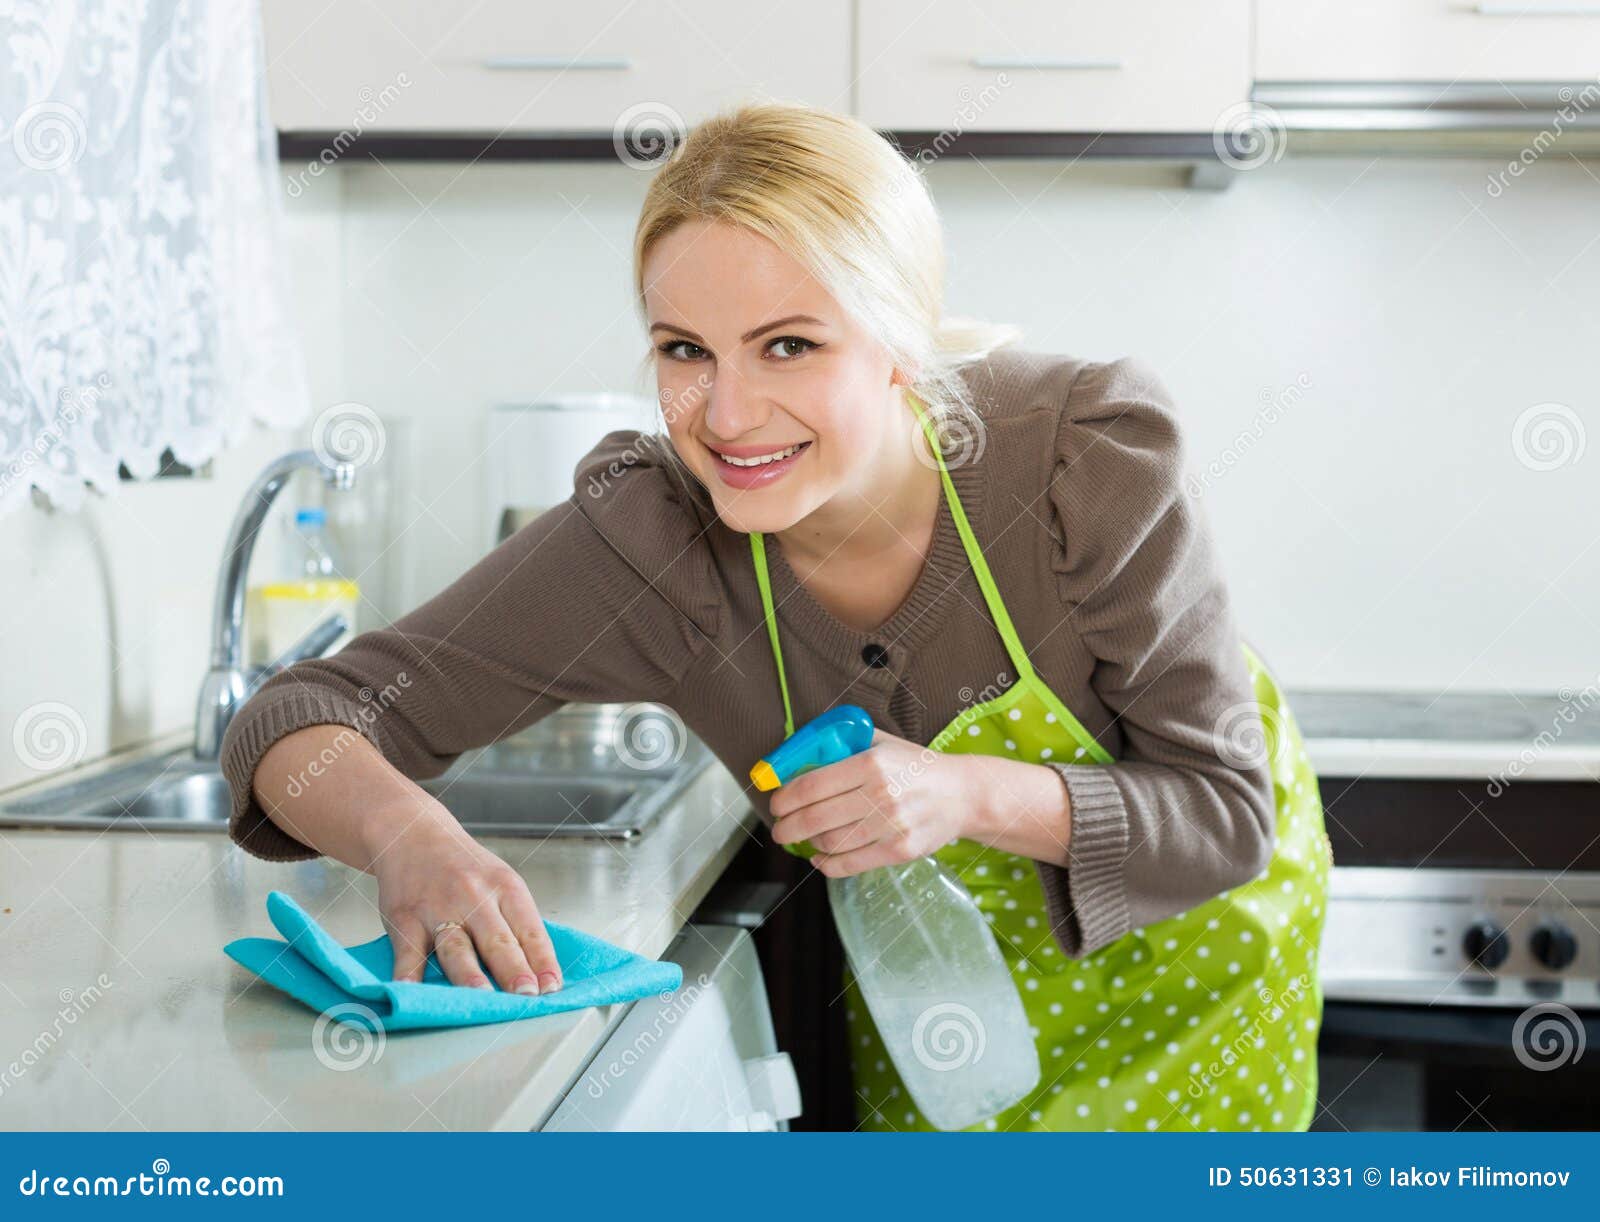 Housewife Cleaning Stock Image Image Of Kitchen Girl 50631331